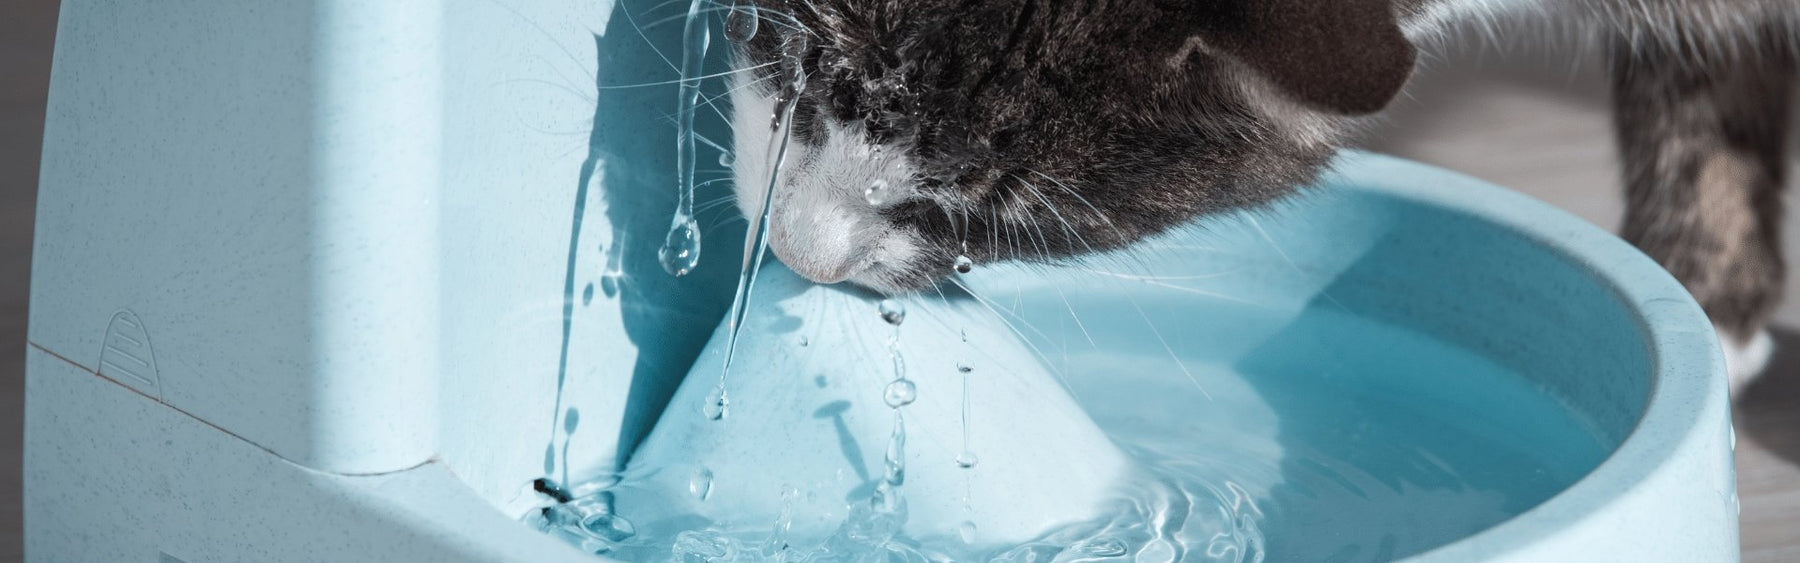 When should my cat’s water fountain filter be replaced? - DogCare Online Store